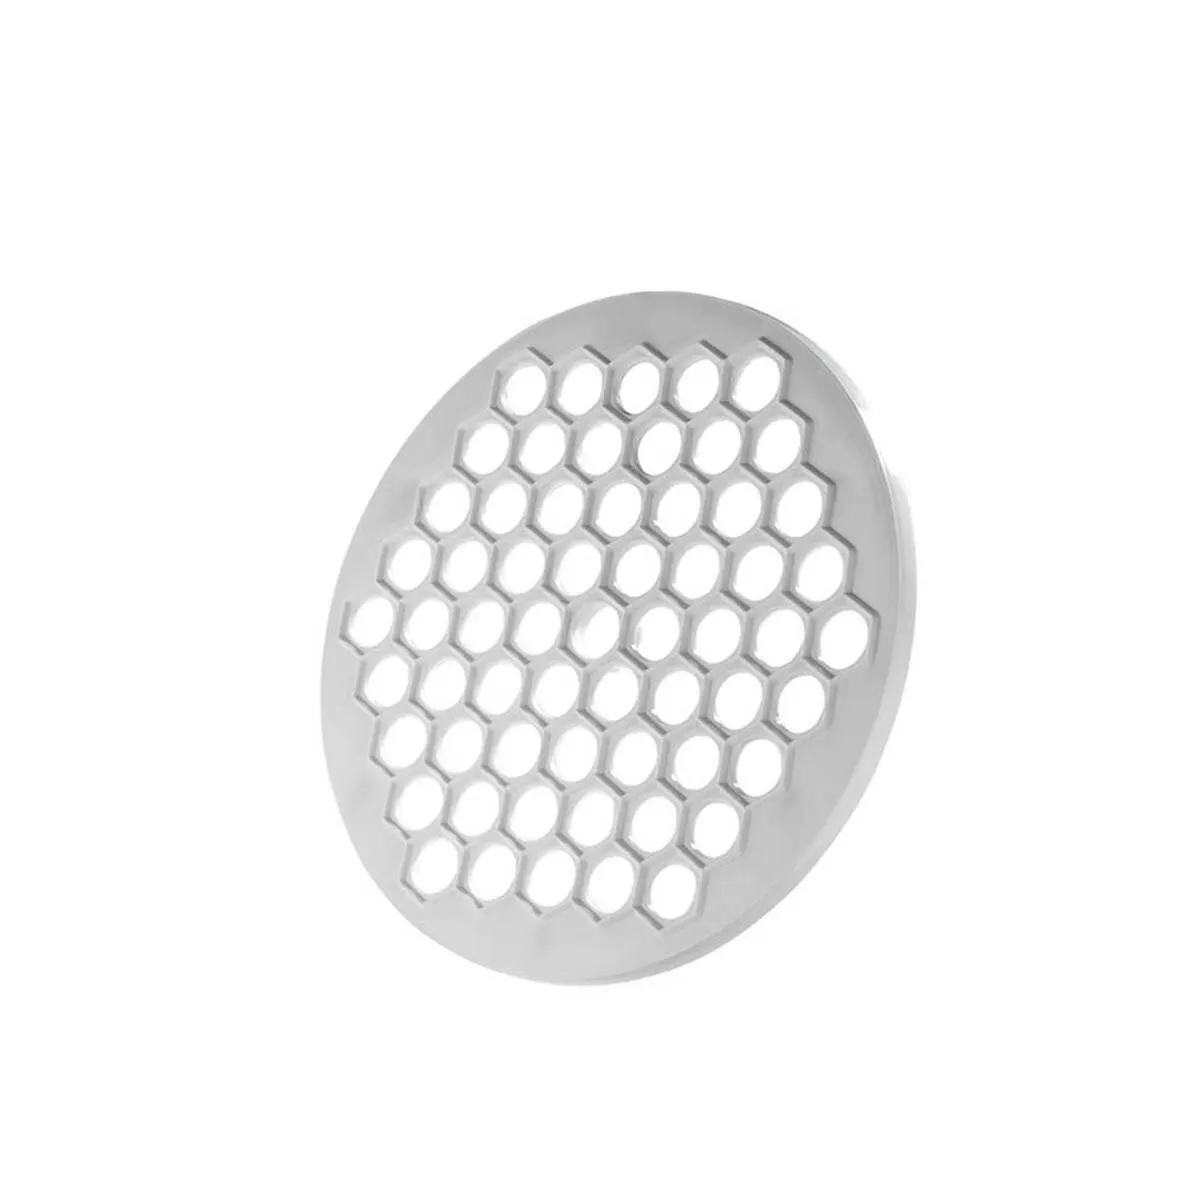 61 division Honeycomb Shaped Practical Ravioli Grooving Cutter Mold Mantıma 3d flower pot silicone mold diy diamond pattern flower pot mold triangle round shaped silicone mould for resin making